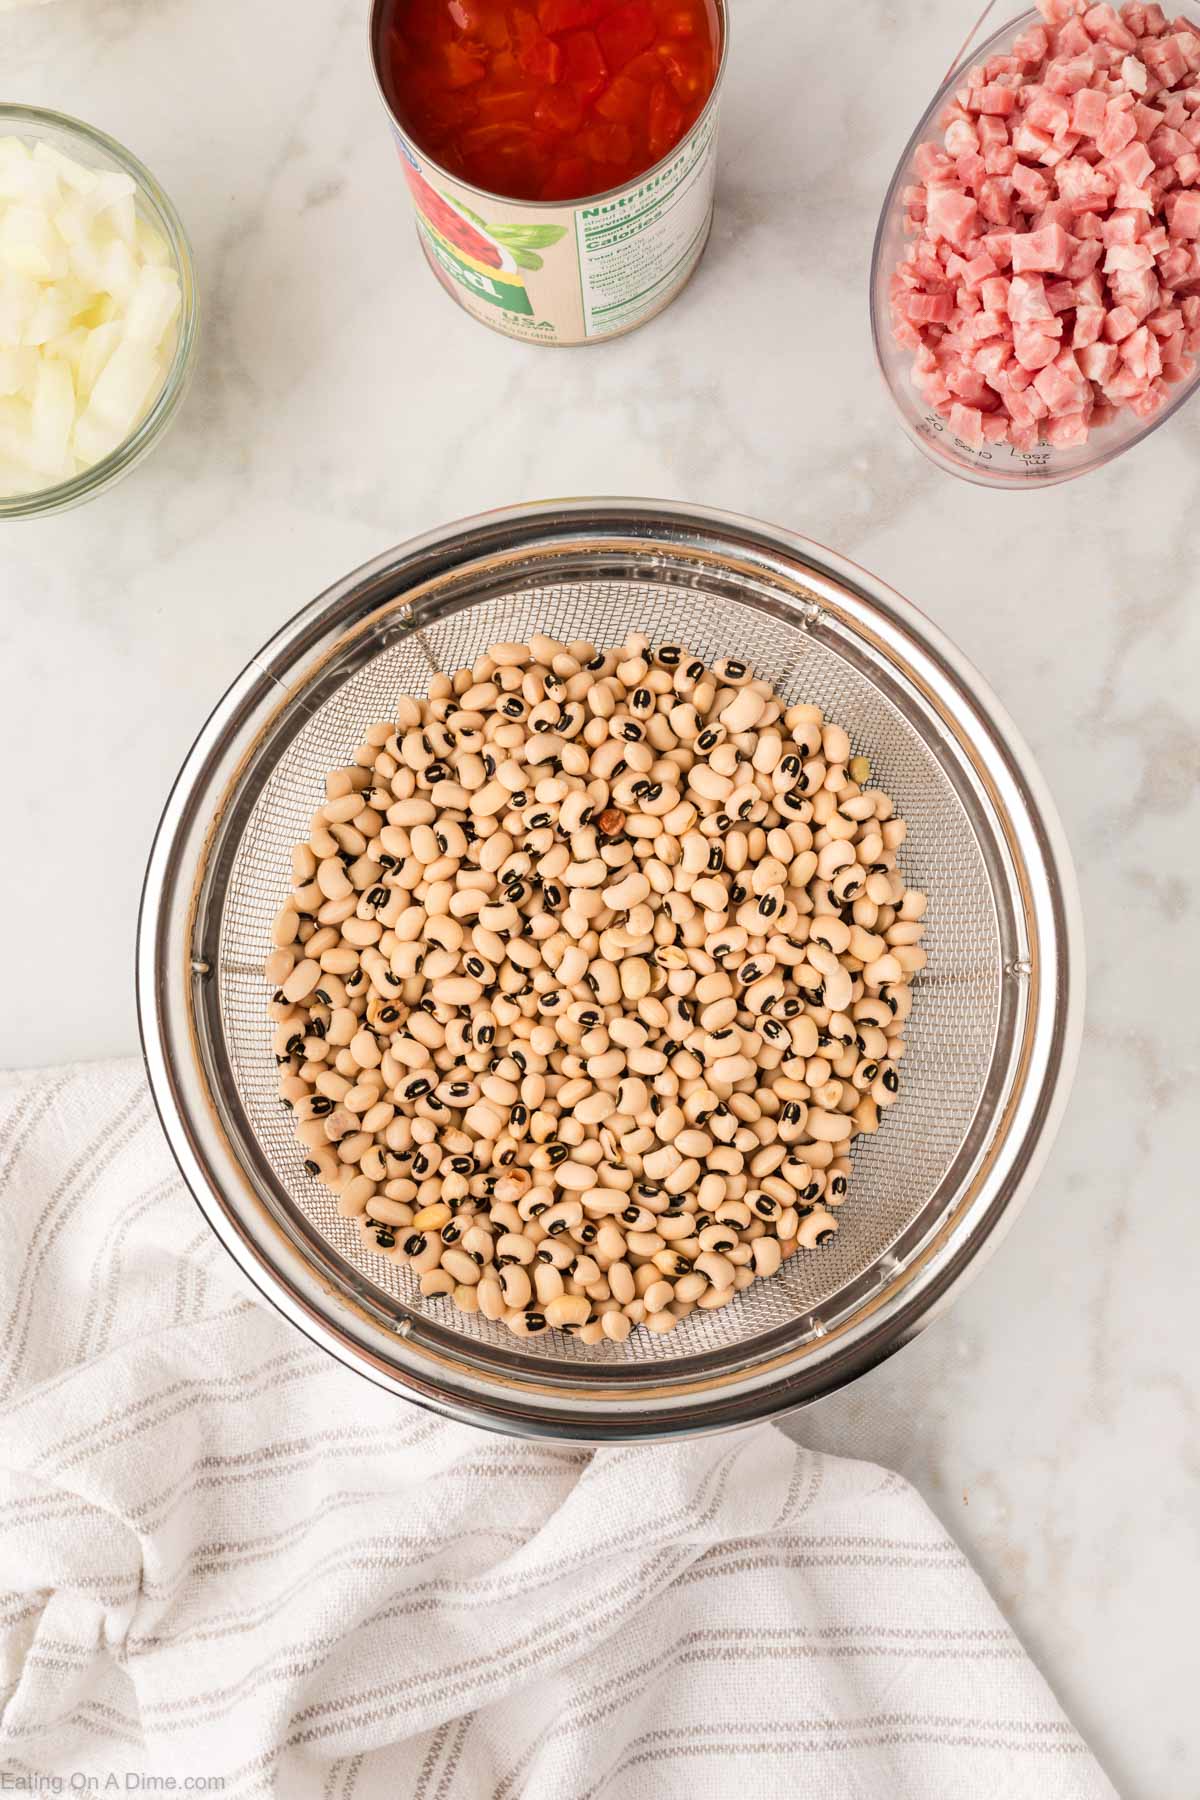 Rinsing the black eyed peas in a colander